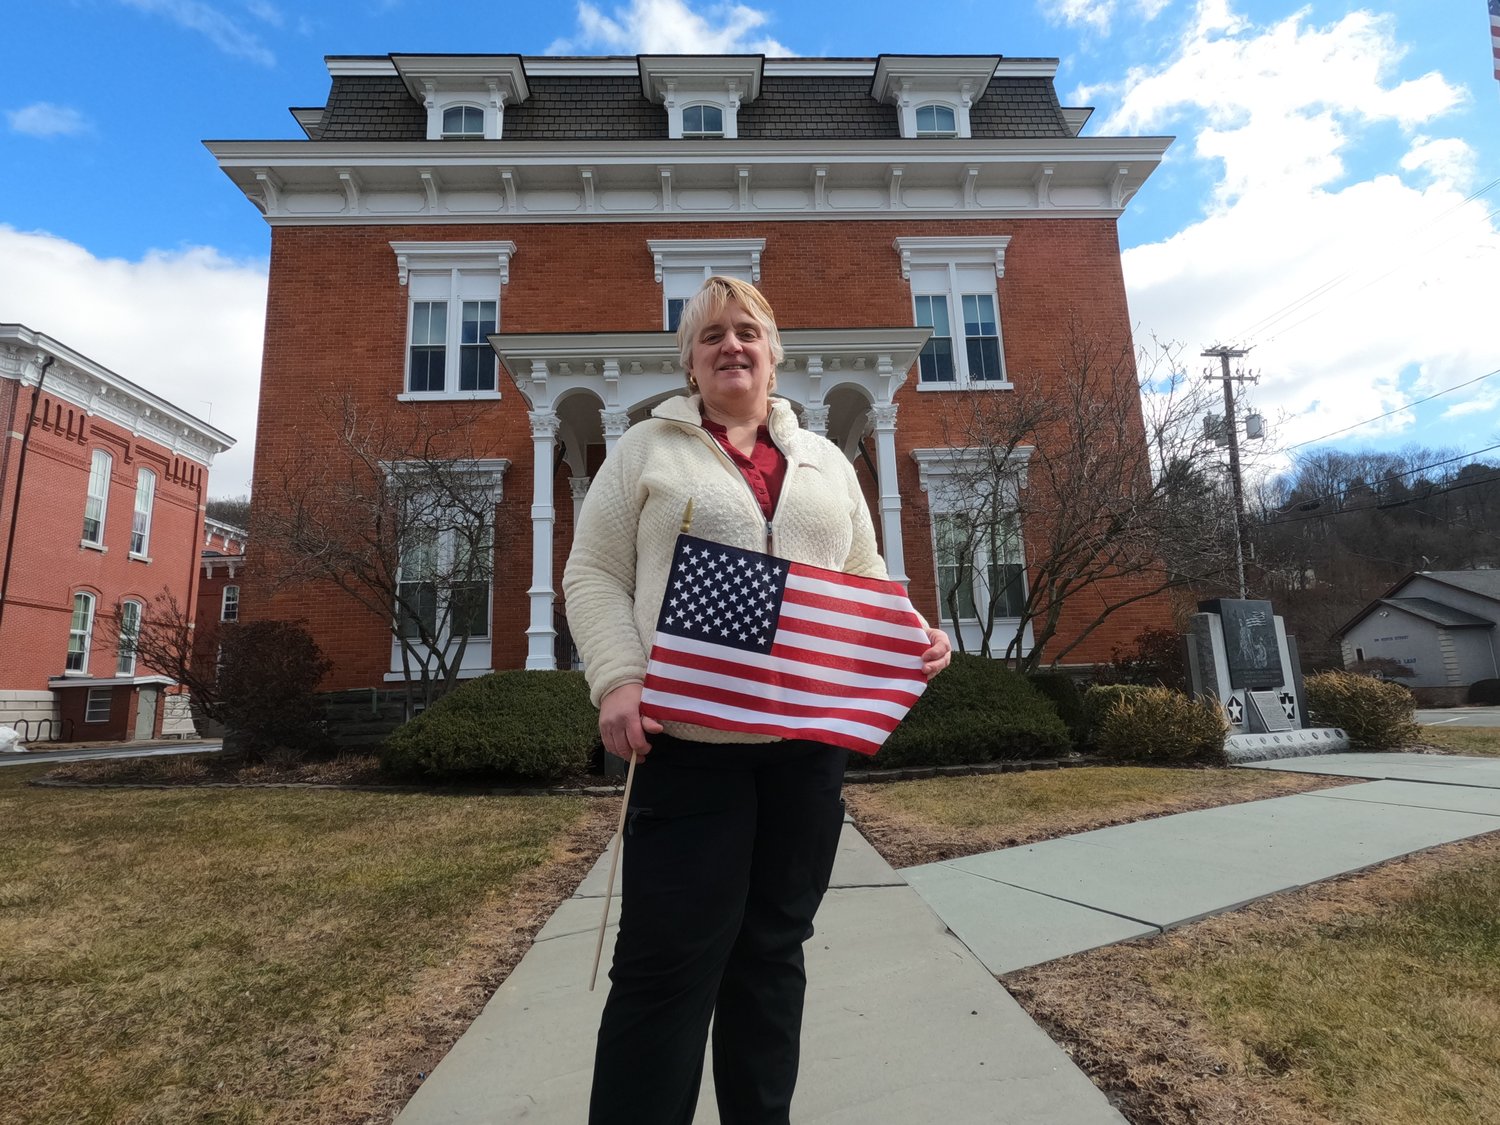 Kim Erickson stands in front of the Dimmick Building, a historic Honesdale building that once served as the county’s first hospital. She plans to place a monument to female veterans here.